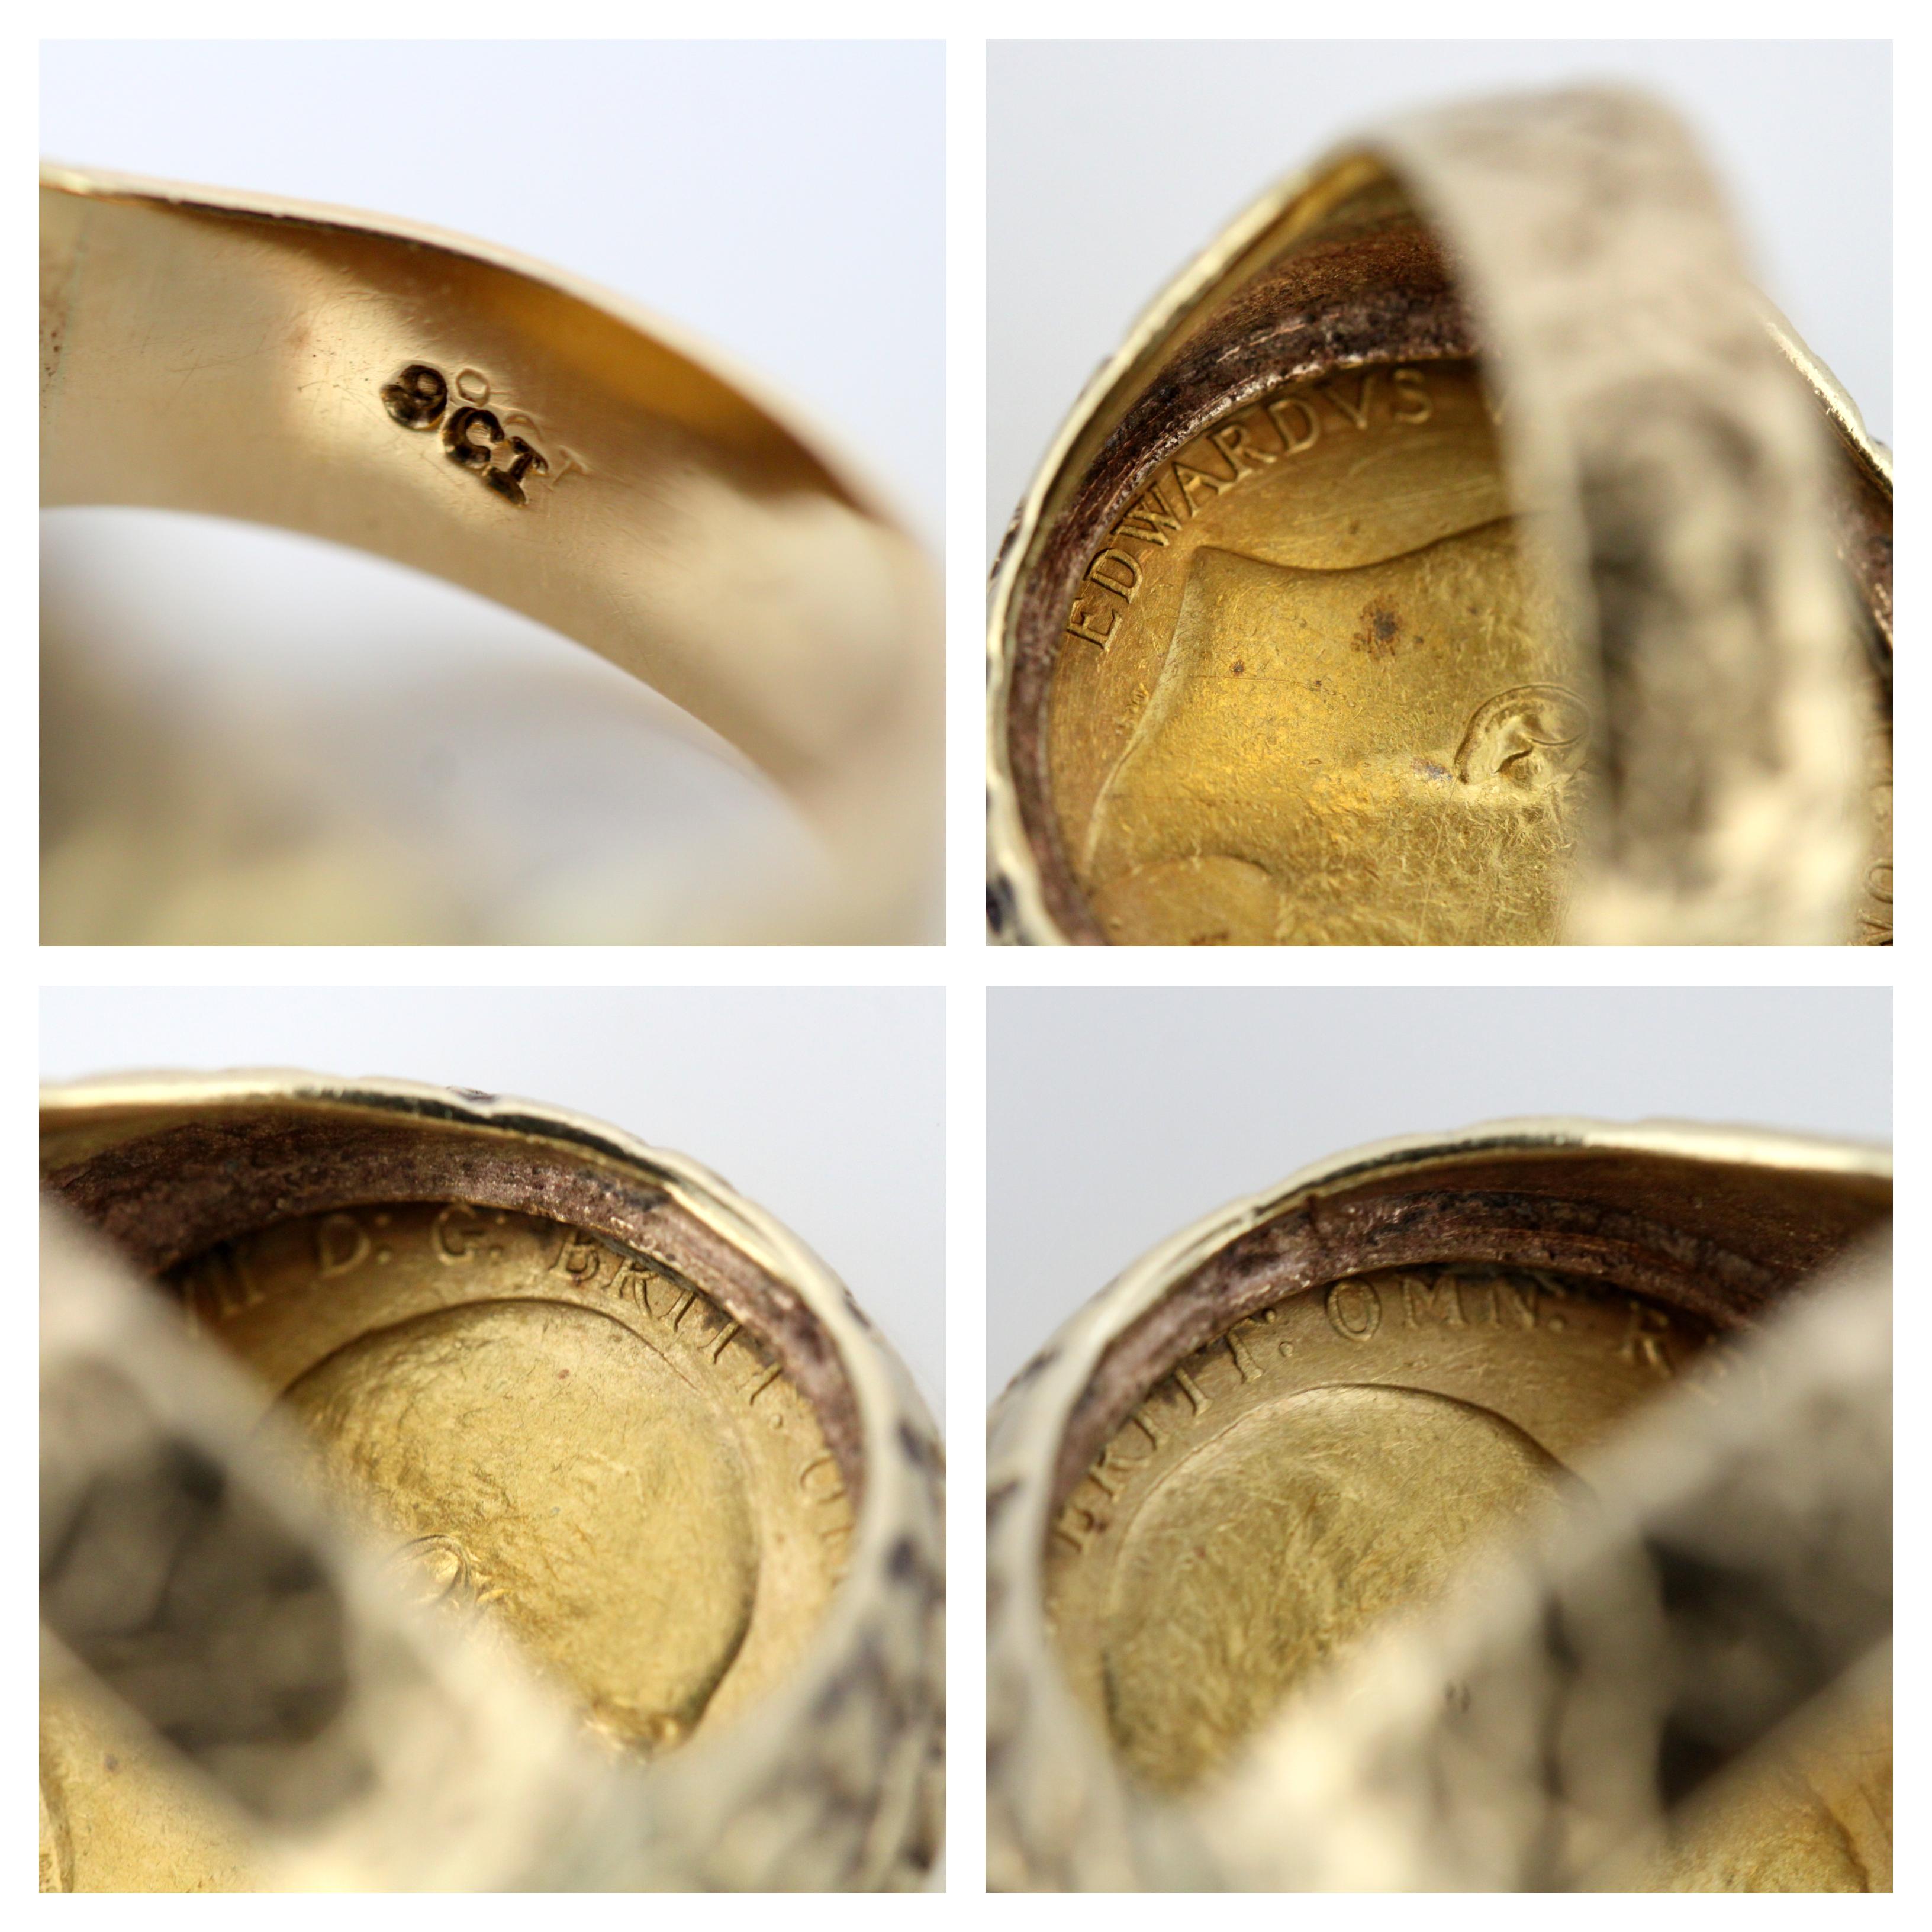 Men's Ring with 1910 Gold Sovereign Edward vii London in a 9 Karat Gold Shank 3